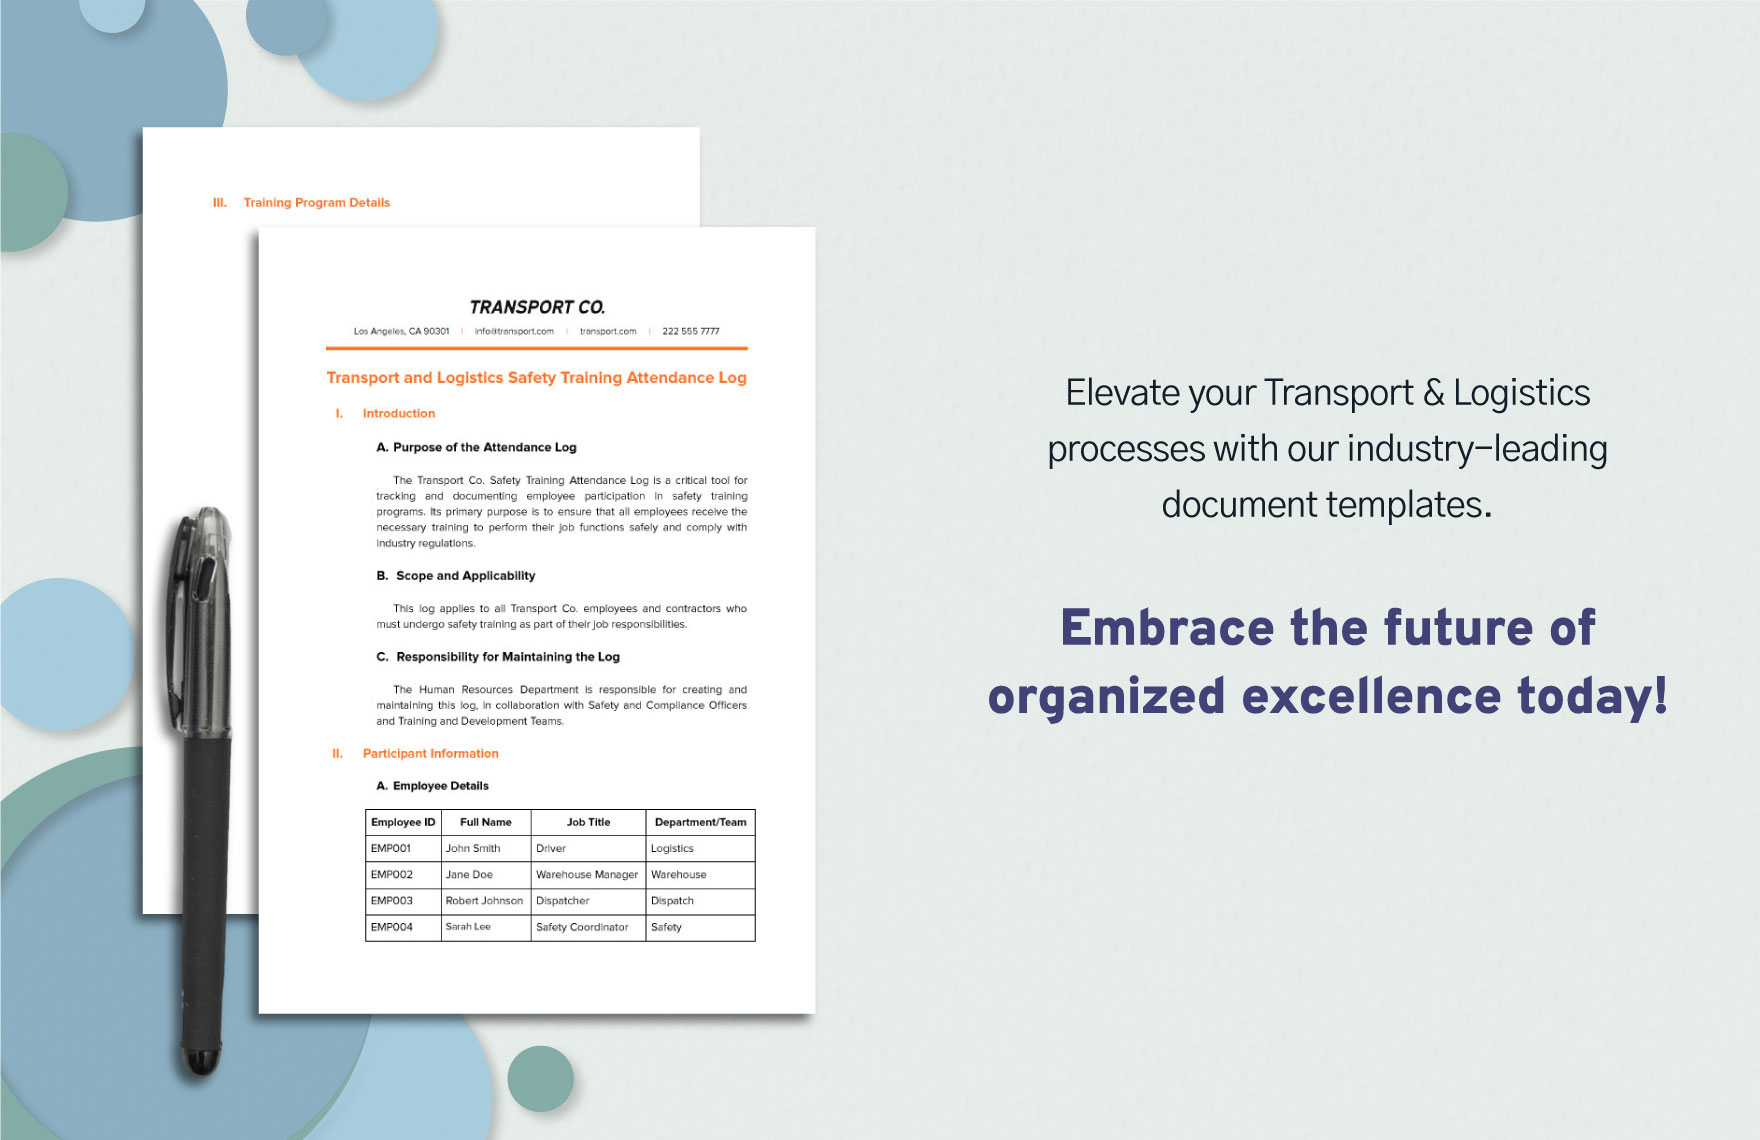 Transport and Logistics Safety Training Attendance Log Template